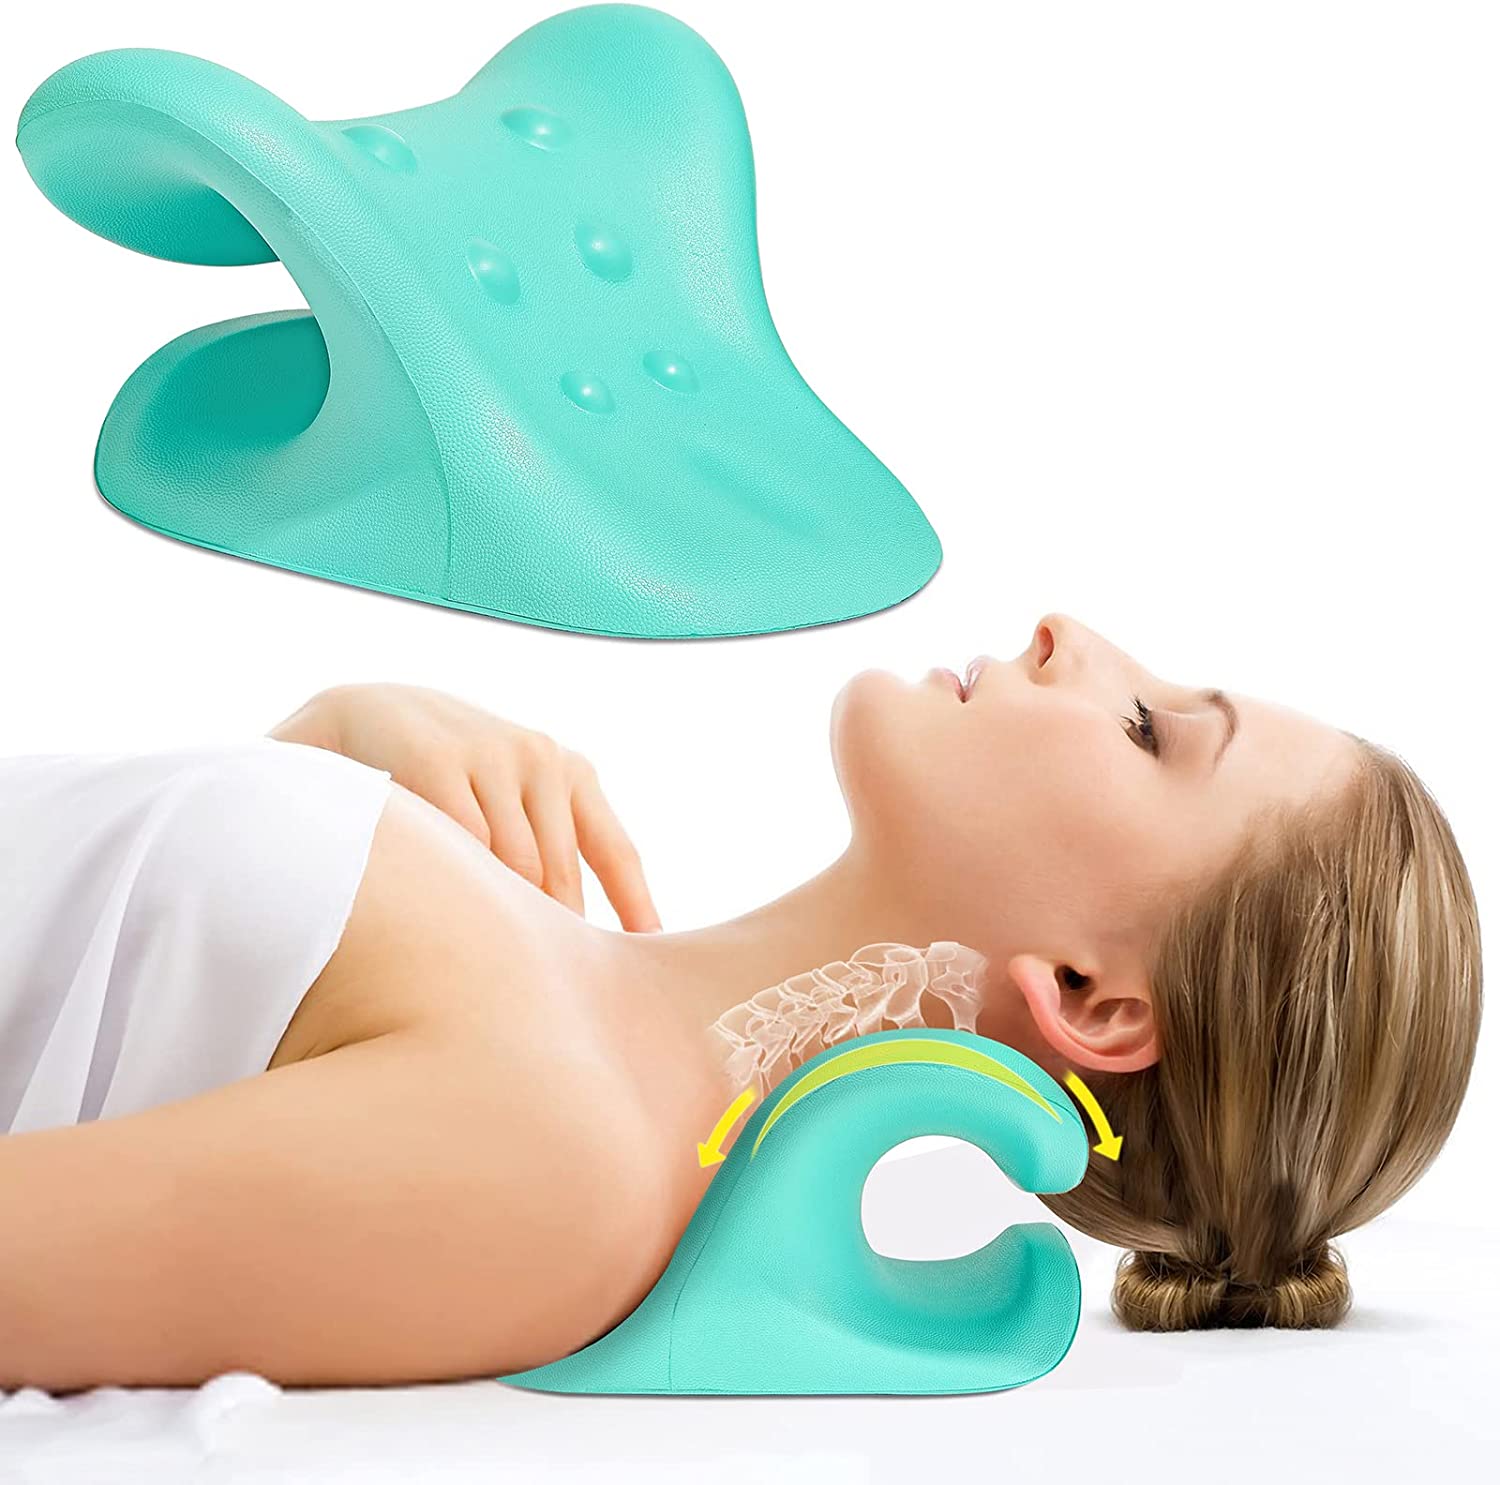 Review of Cervical Traction Device for TMJ Pain Relief and Neck Alignment